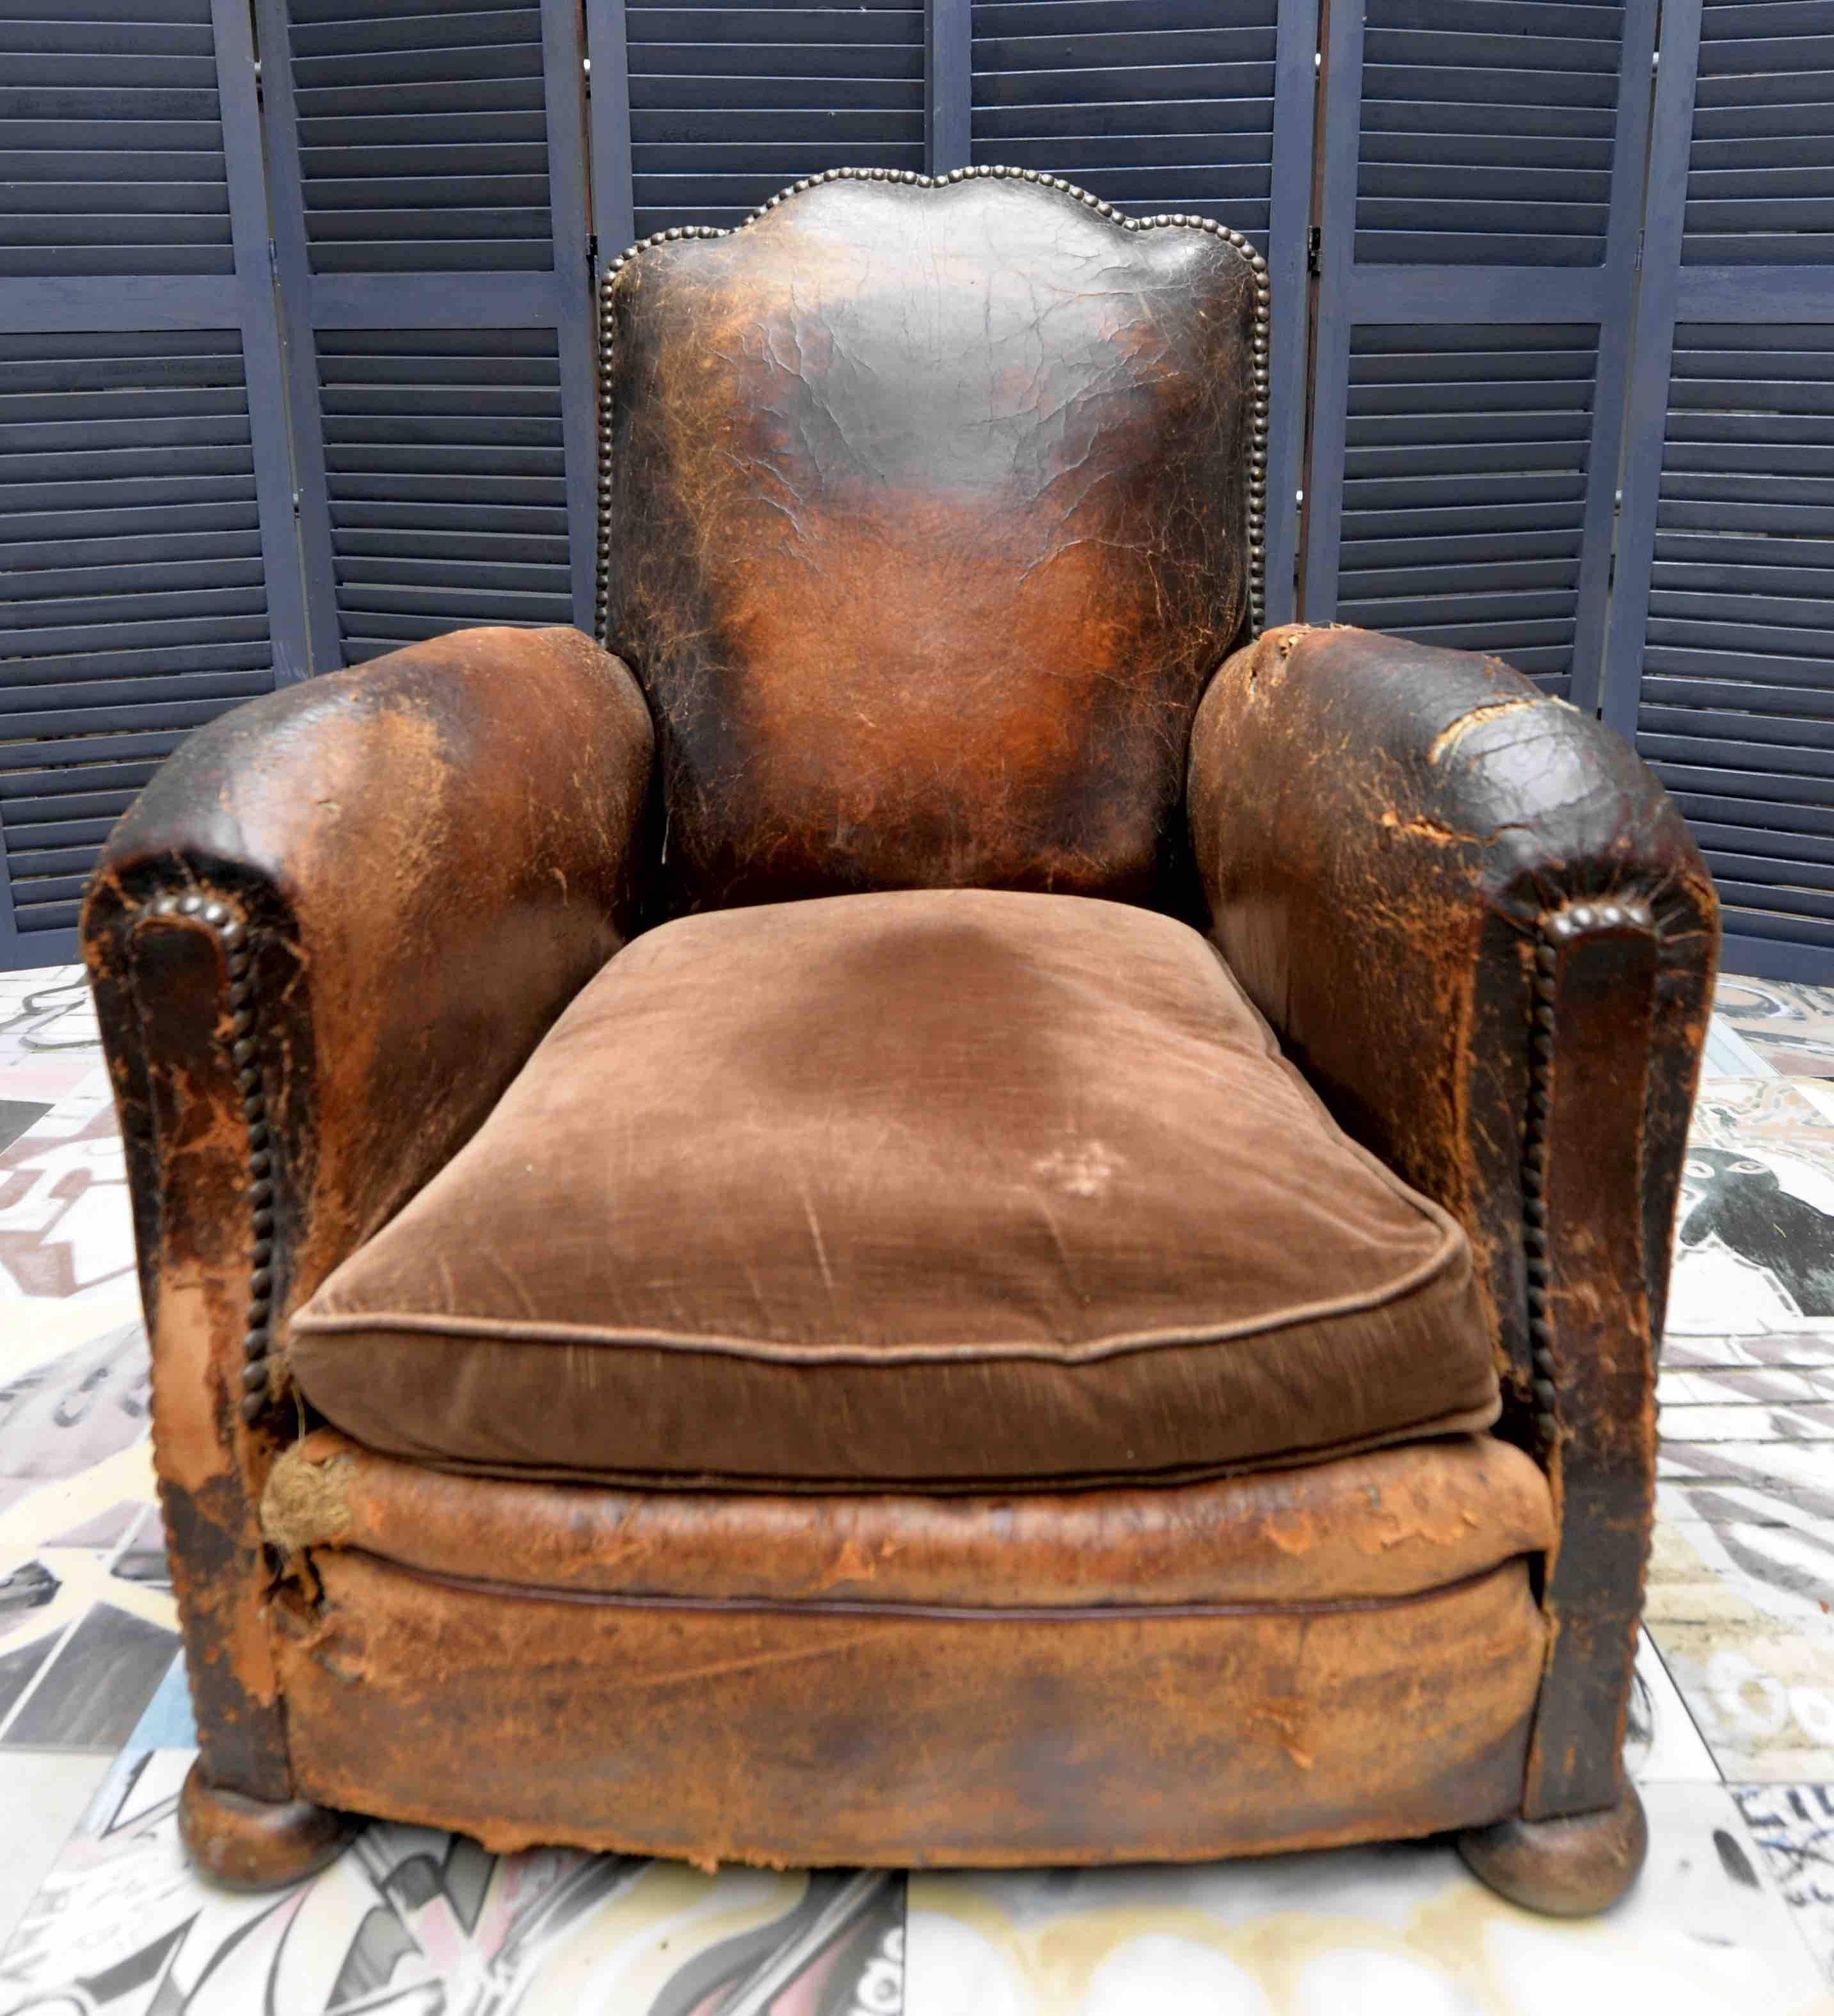 If shipped to the US or EU, no import tax applies. 

Handmade in 19th century France, this chair features original studding and soft velvet feather pillow. The back design is iconic of the period and is rare to find. 

The positioning is very